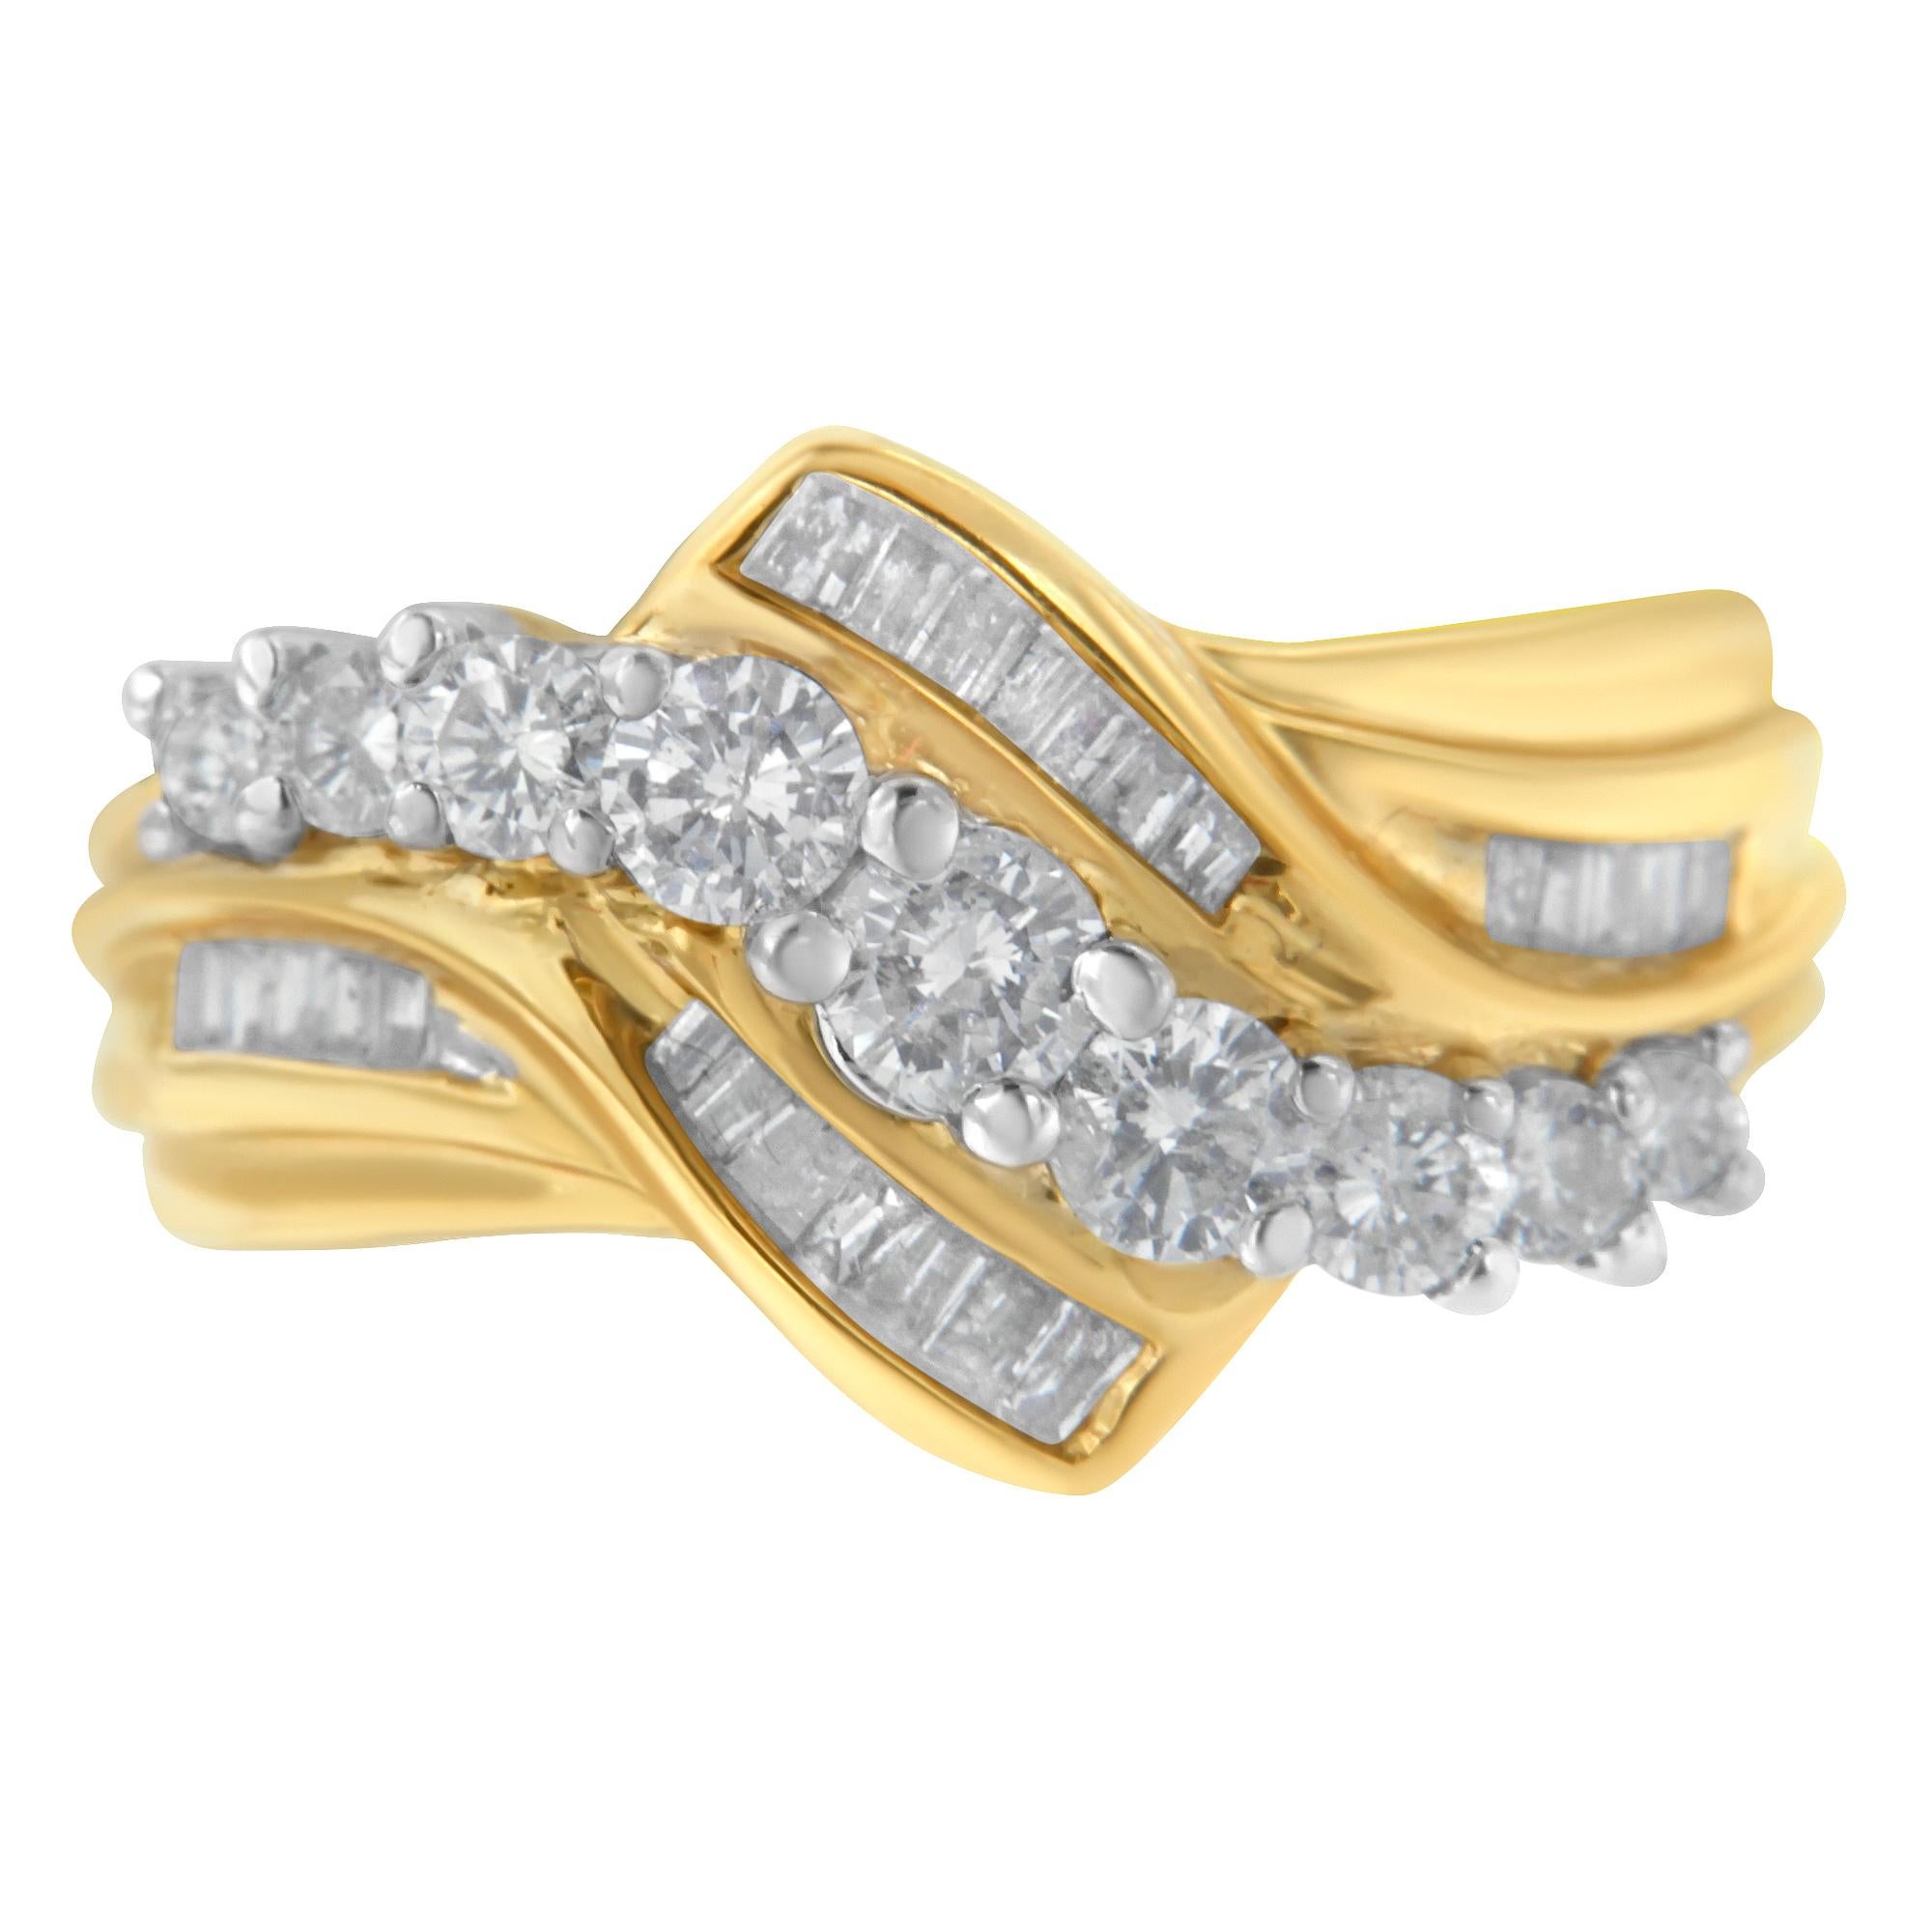 10K Two-Toned 1.00 Carat Diamond Bypass Ring